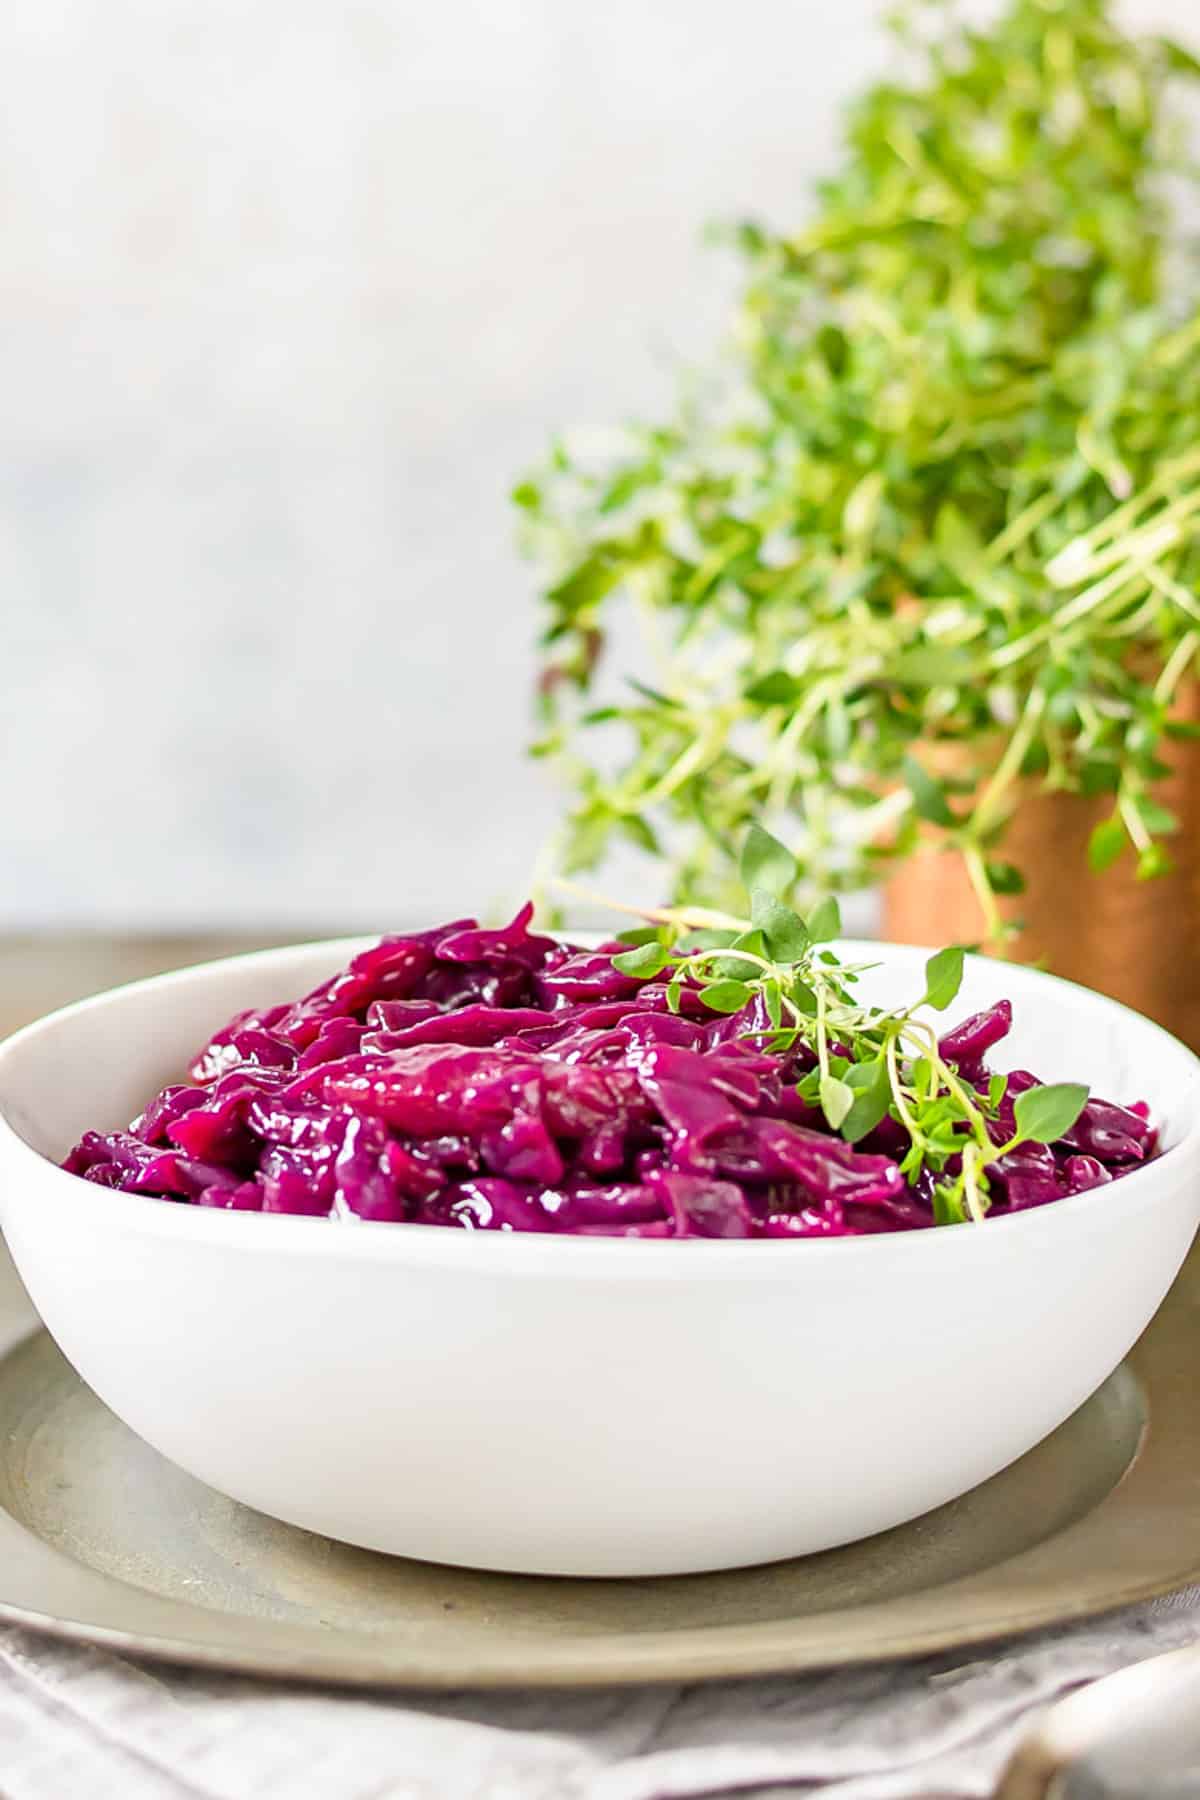 Table with a dish of spiced red cabbage.